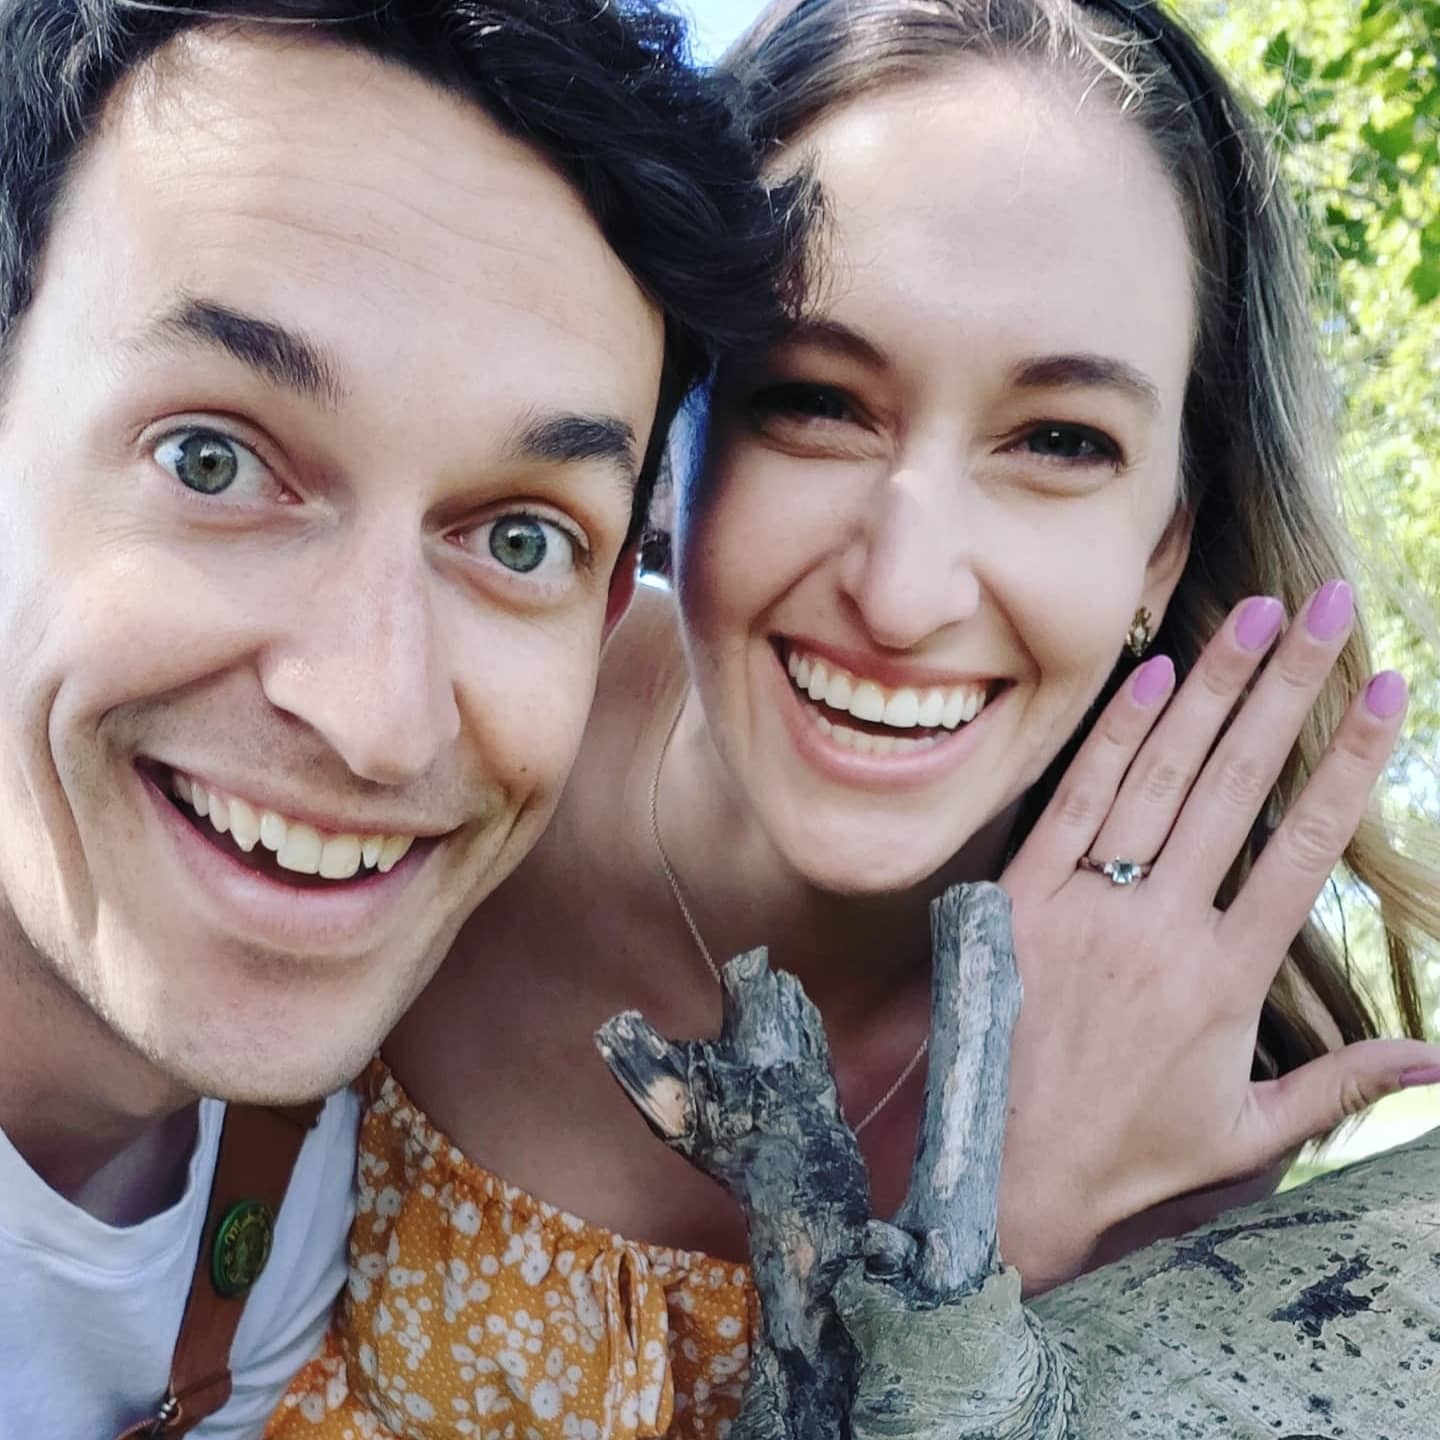 Kira Josephson and her boyfriend, Ben Freed, are engaged to be married